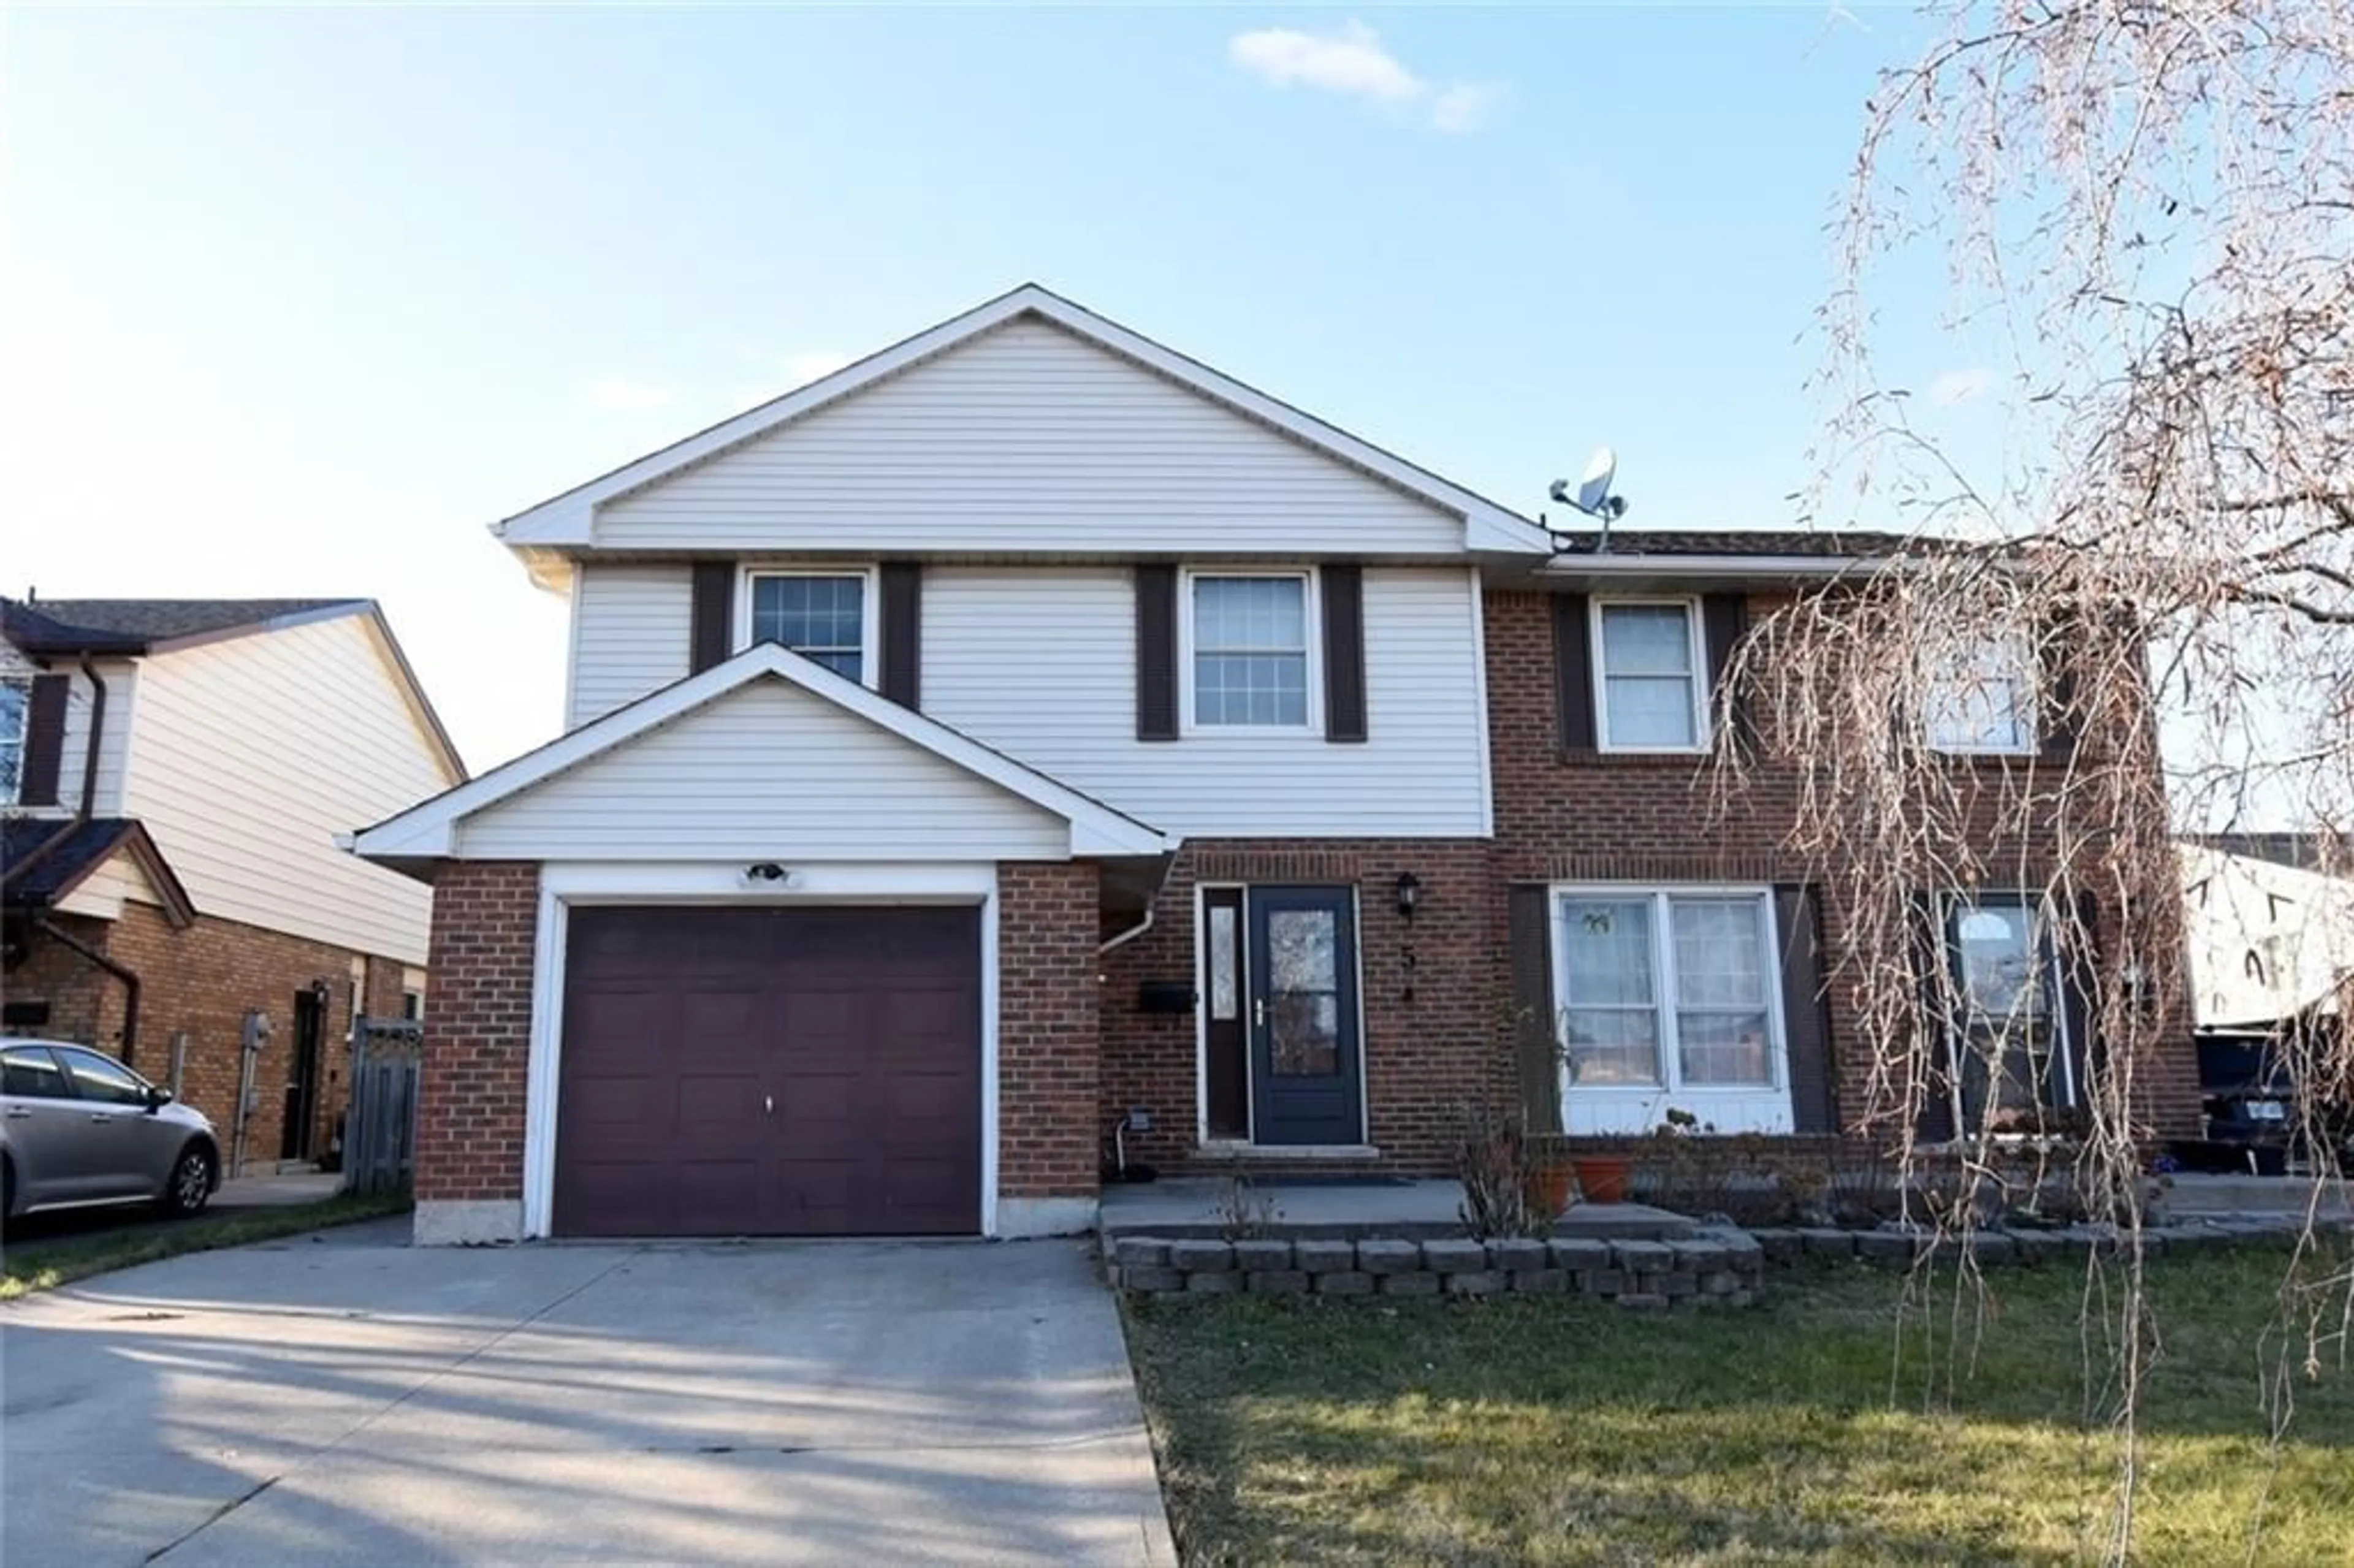 Home with brick exterior material for 5 SPARTAN Ave, Stoney Creek Ontario L8E 3X4